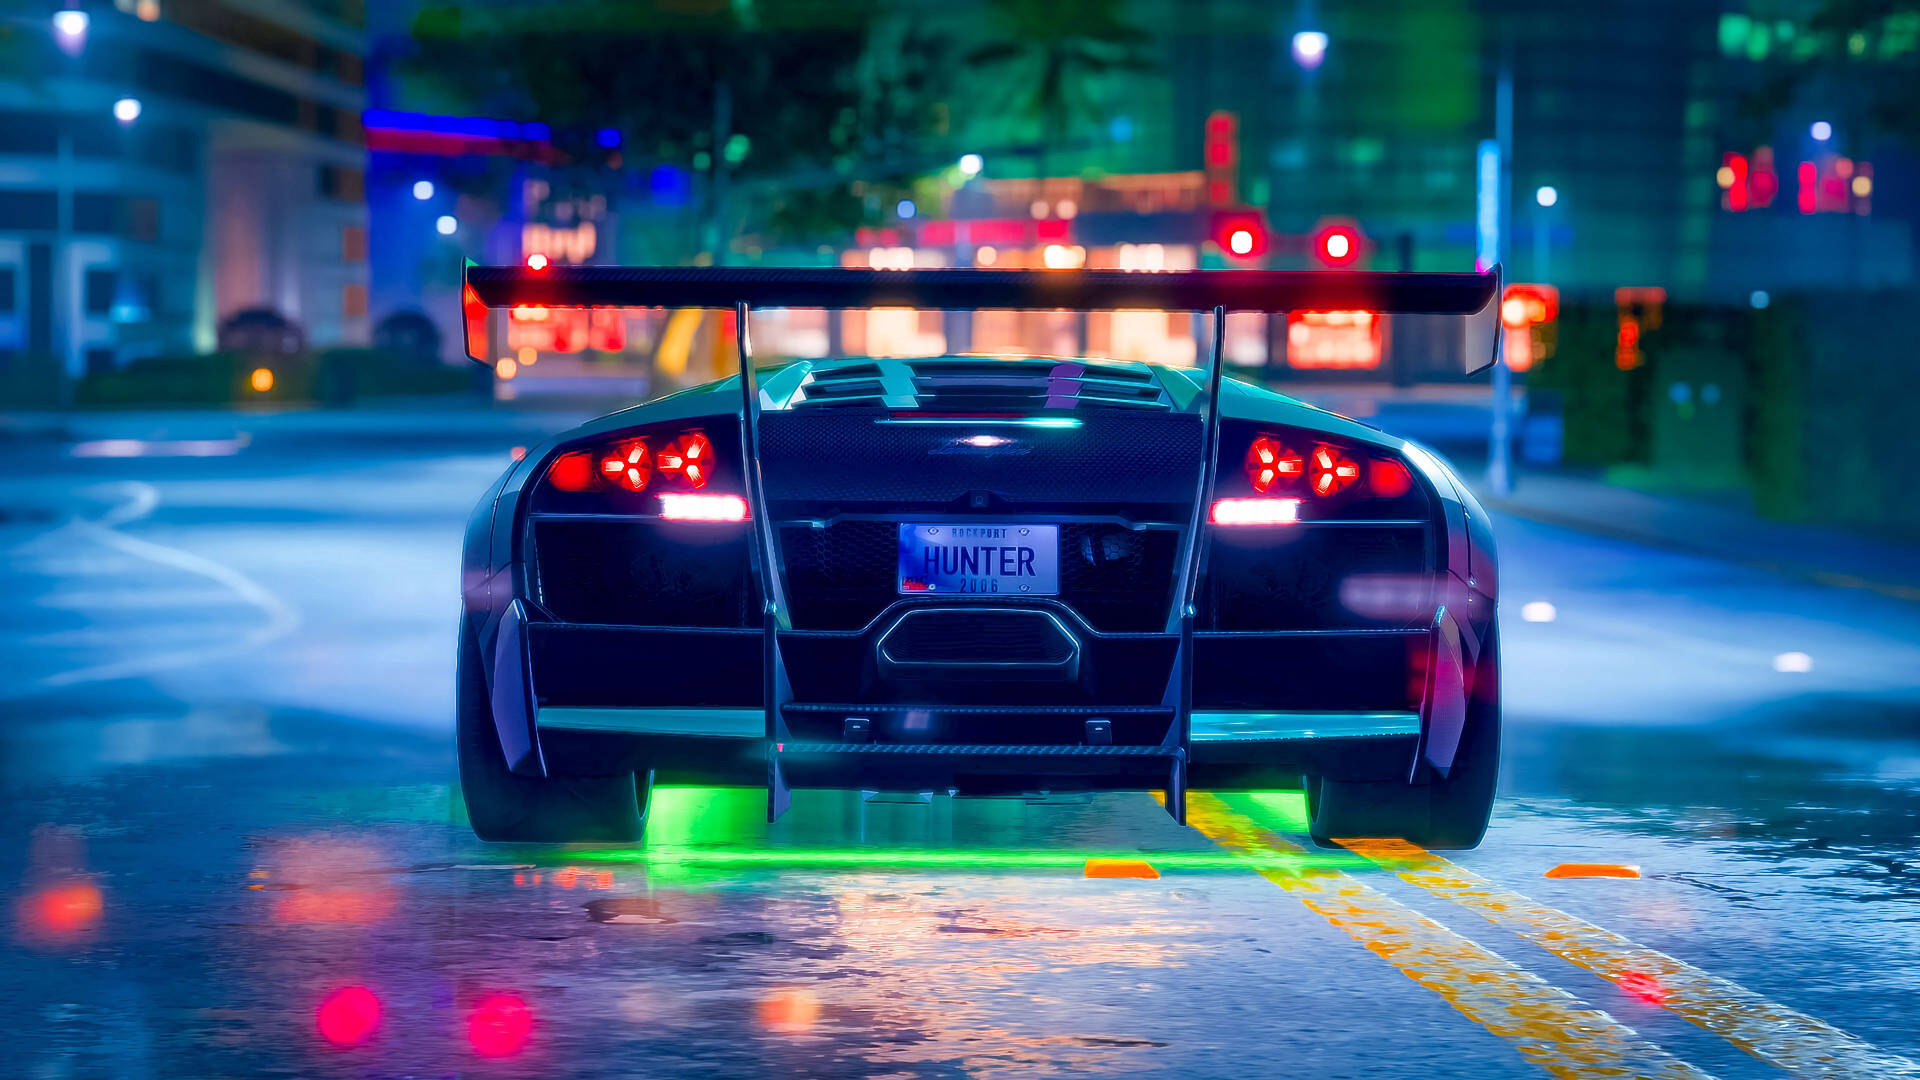 Free Neon Car Wallpaper Downloads, [100+] Neon Car Wallpapers for FREE |  